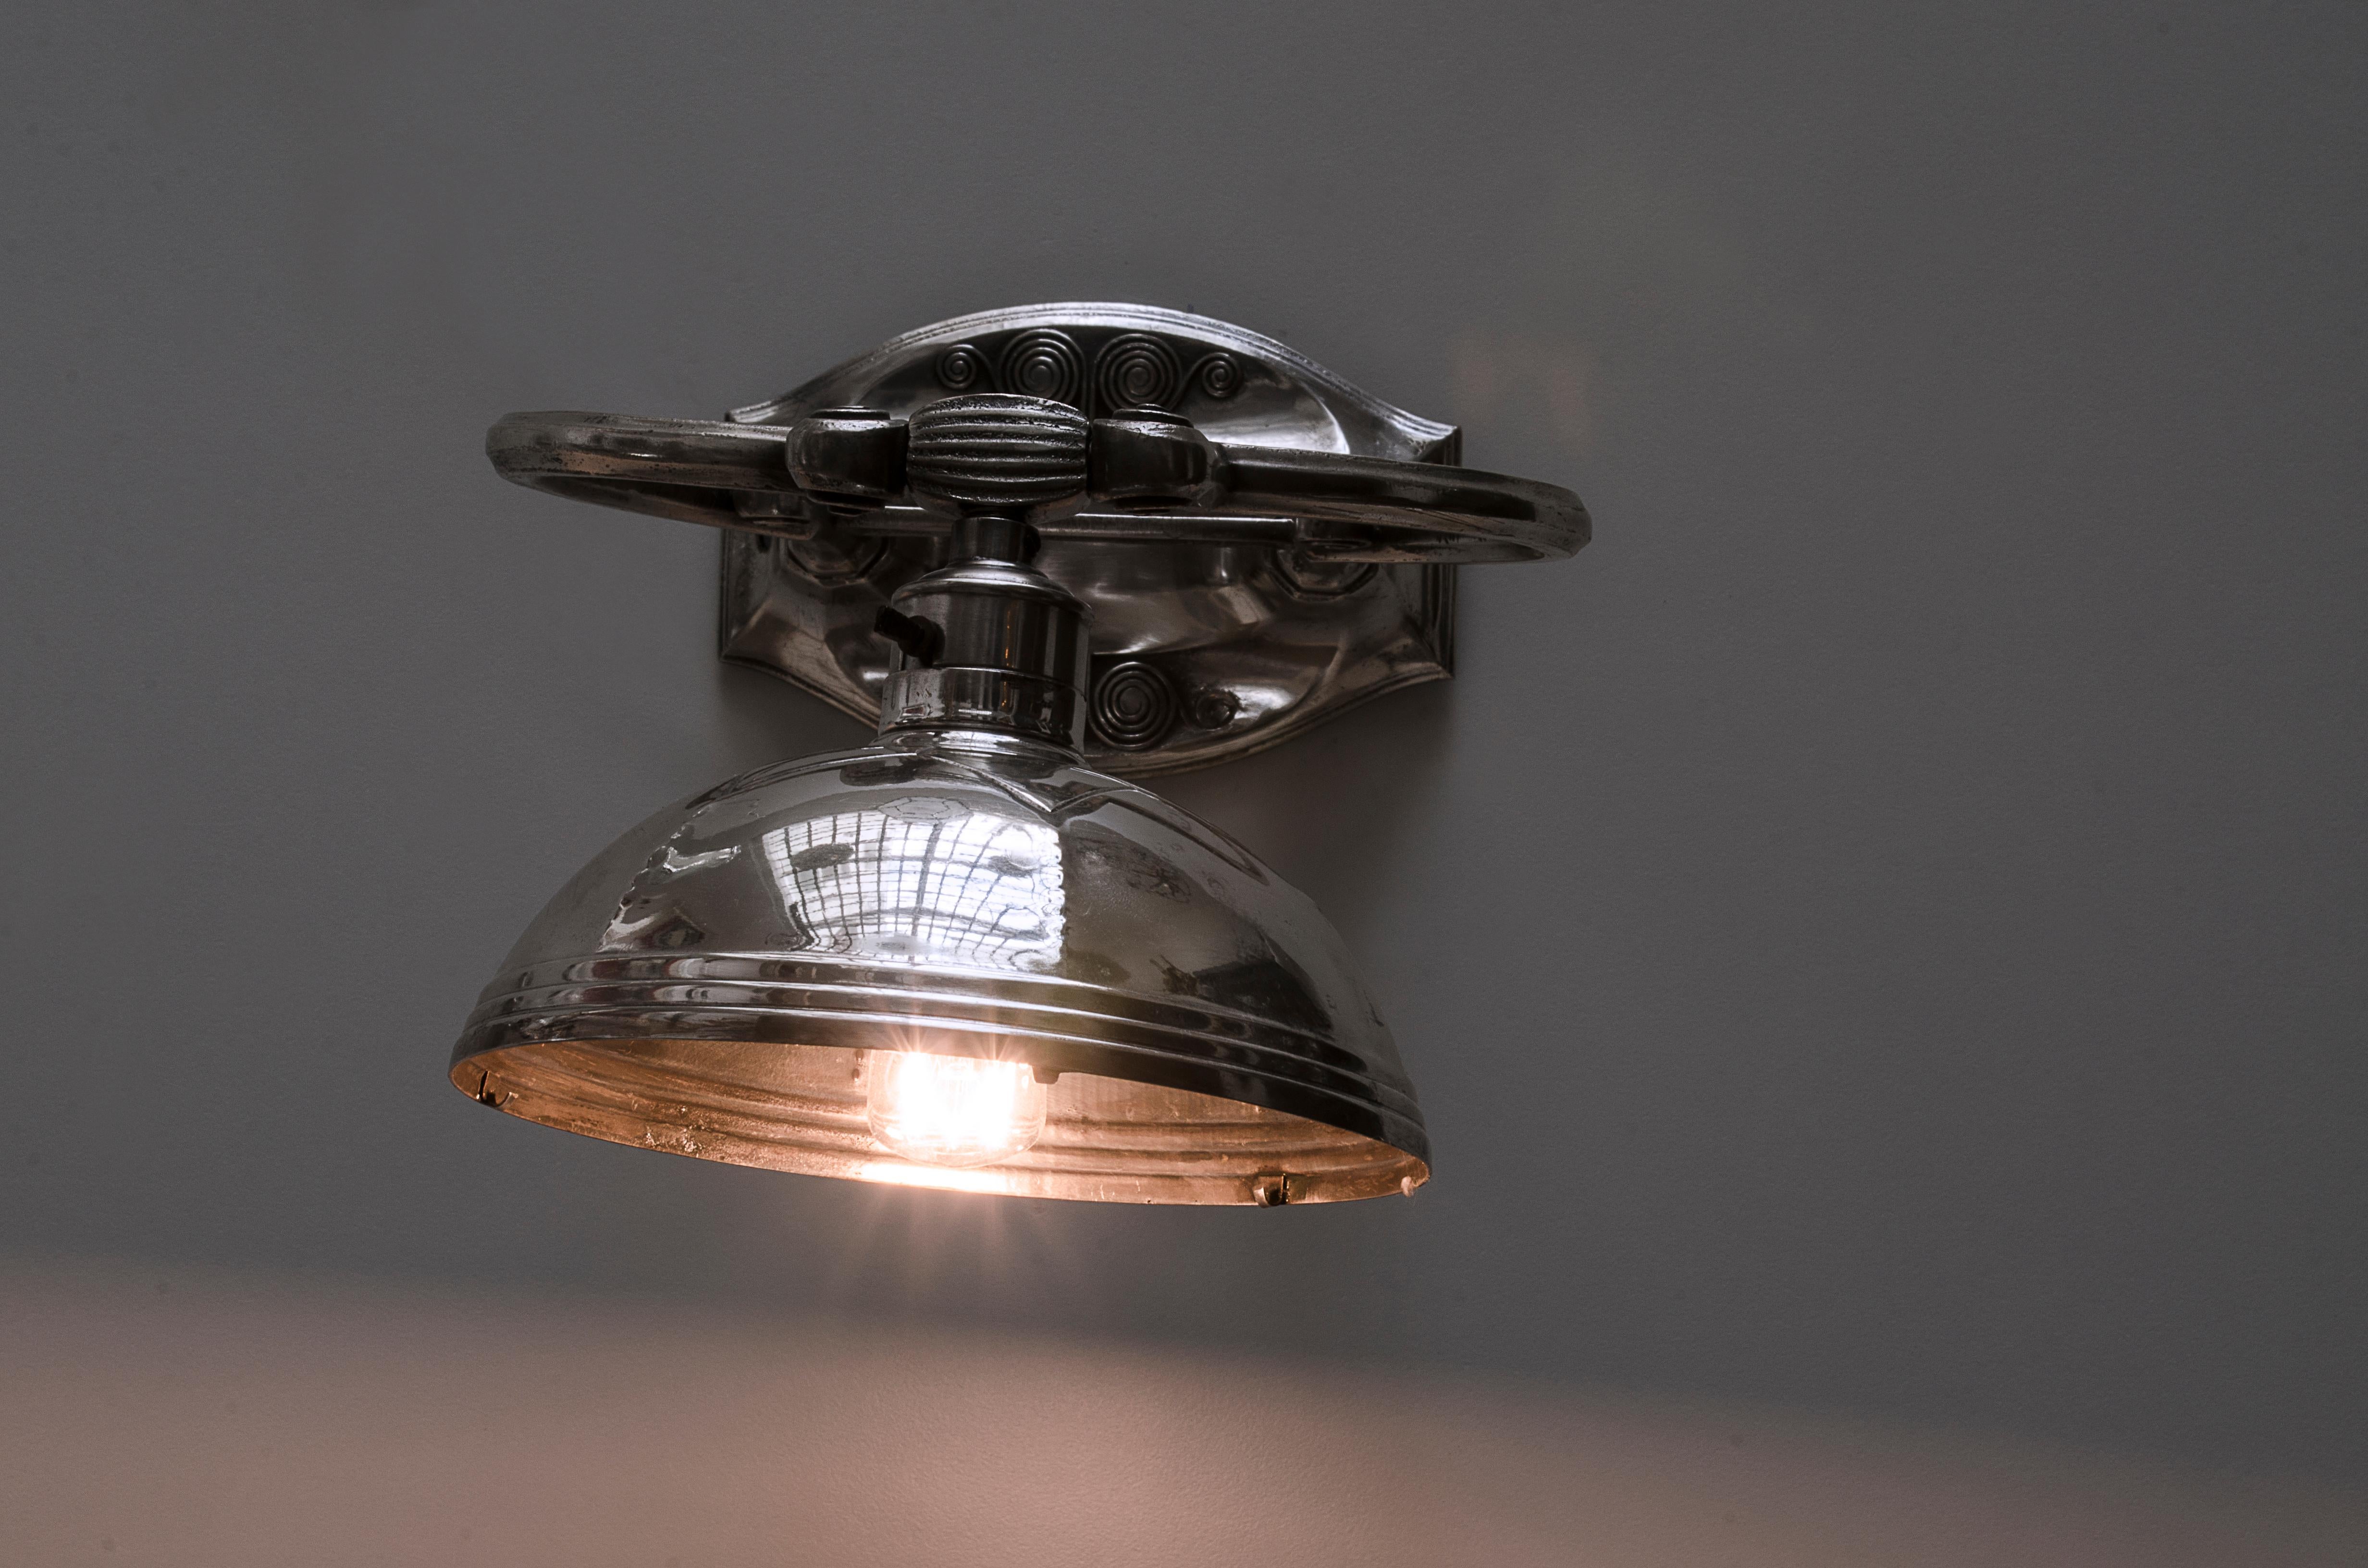 Pair of movable boat wall lights, made of silver-plated bronze and original switch. Manufactured by the Orivit house (1894-1905), which was bought by the Württembergische Metalware Fabrik factory (1853 to the present)

Sealed Orivit AOG, numbered